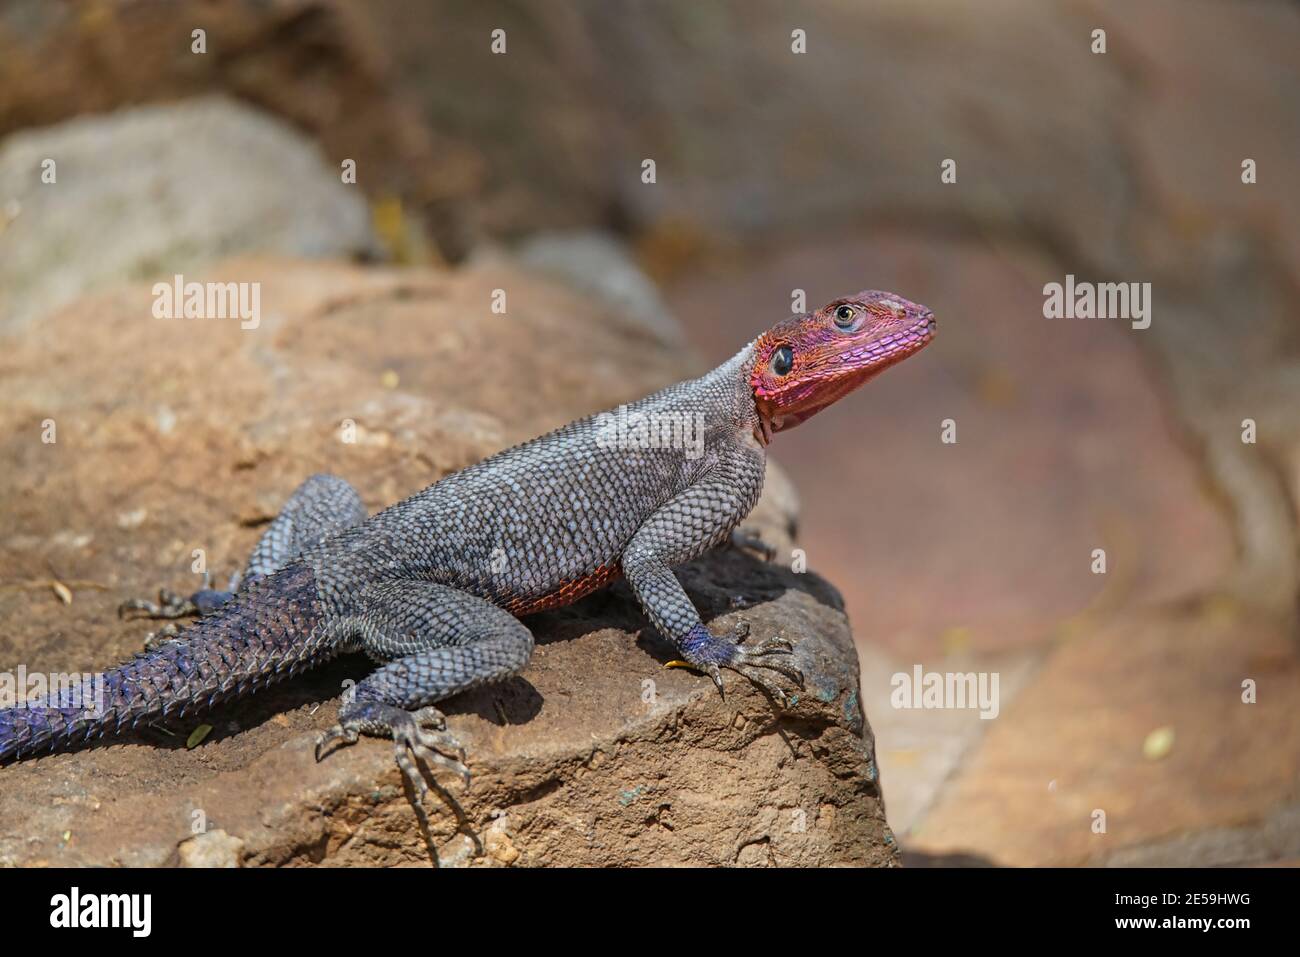 African Rainbow Lizard (Agama agama) on rocks. Bright orange head and scales. Large numbers of animals migrate to the Masai Mara National Wildlife Ref Stock Photo